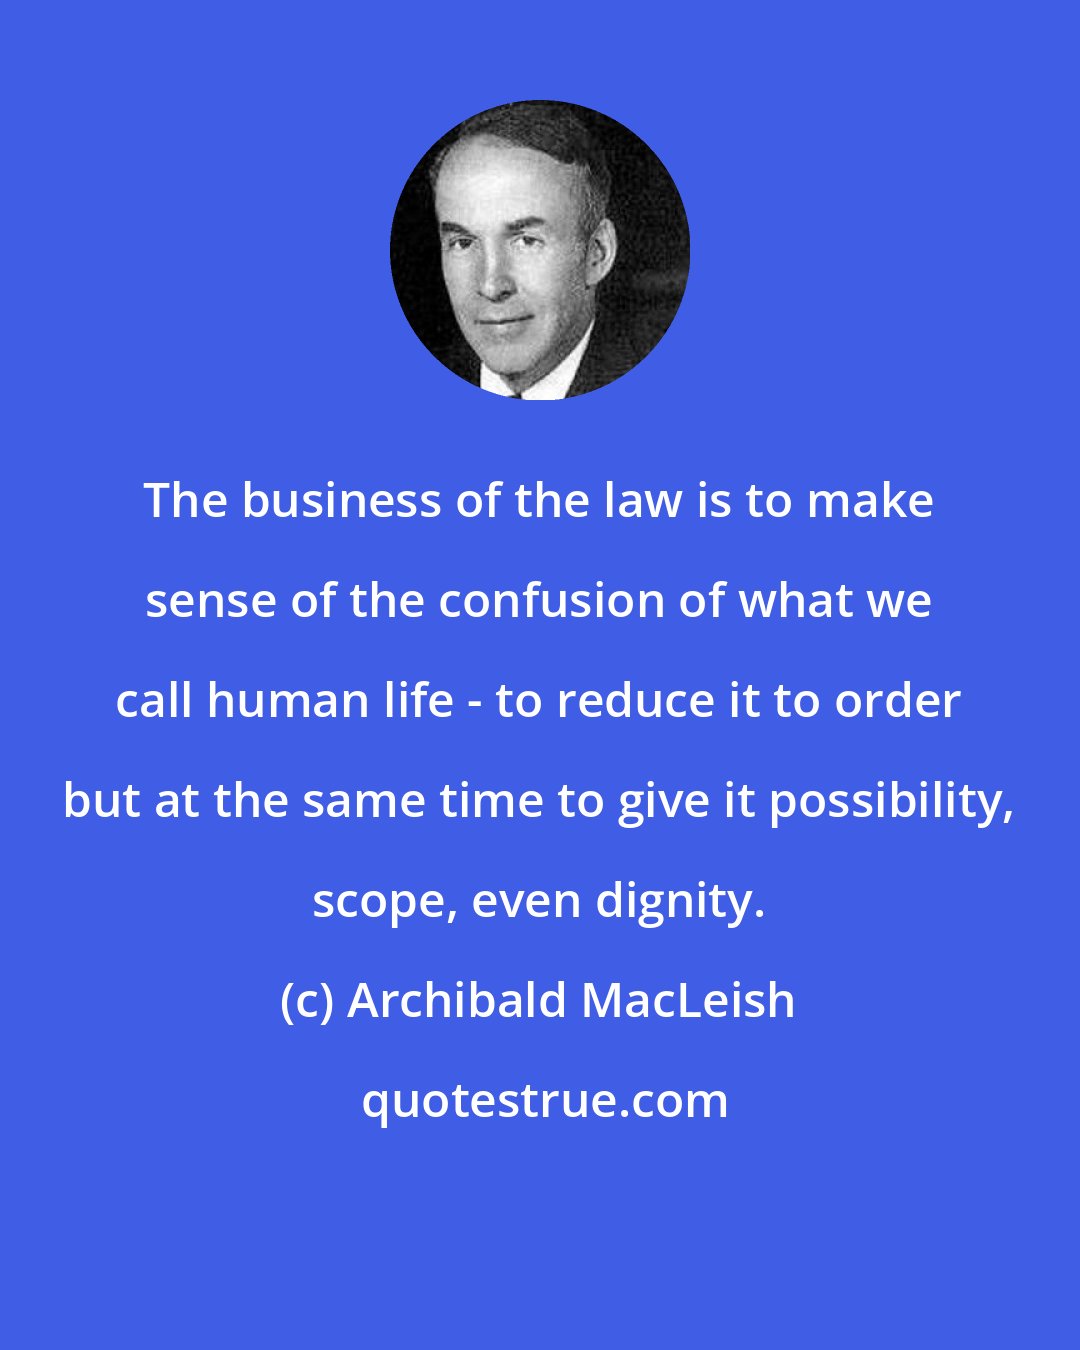 Archibald MacLeish: The business of the law is to make sense of the confusion of what we call human life - to reduce it to order but at the same time to give it possibility, scope, even dignity.